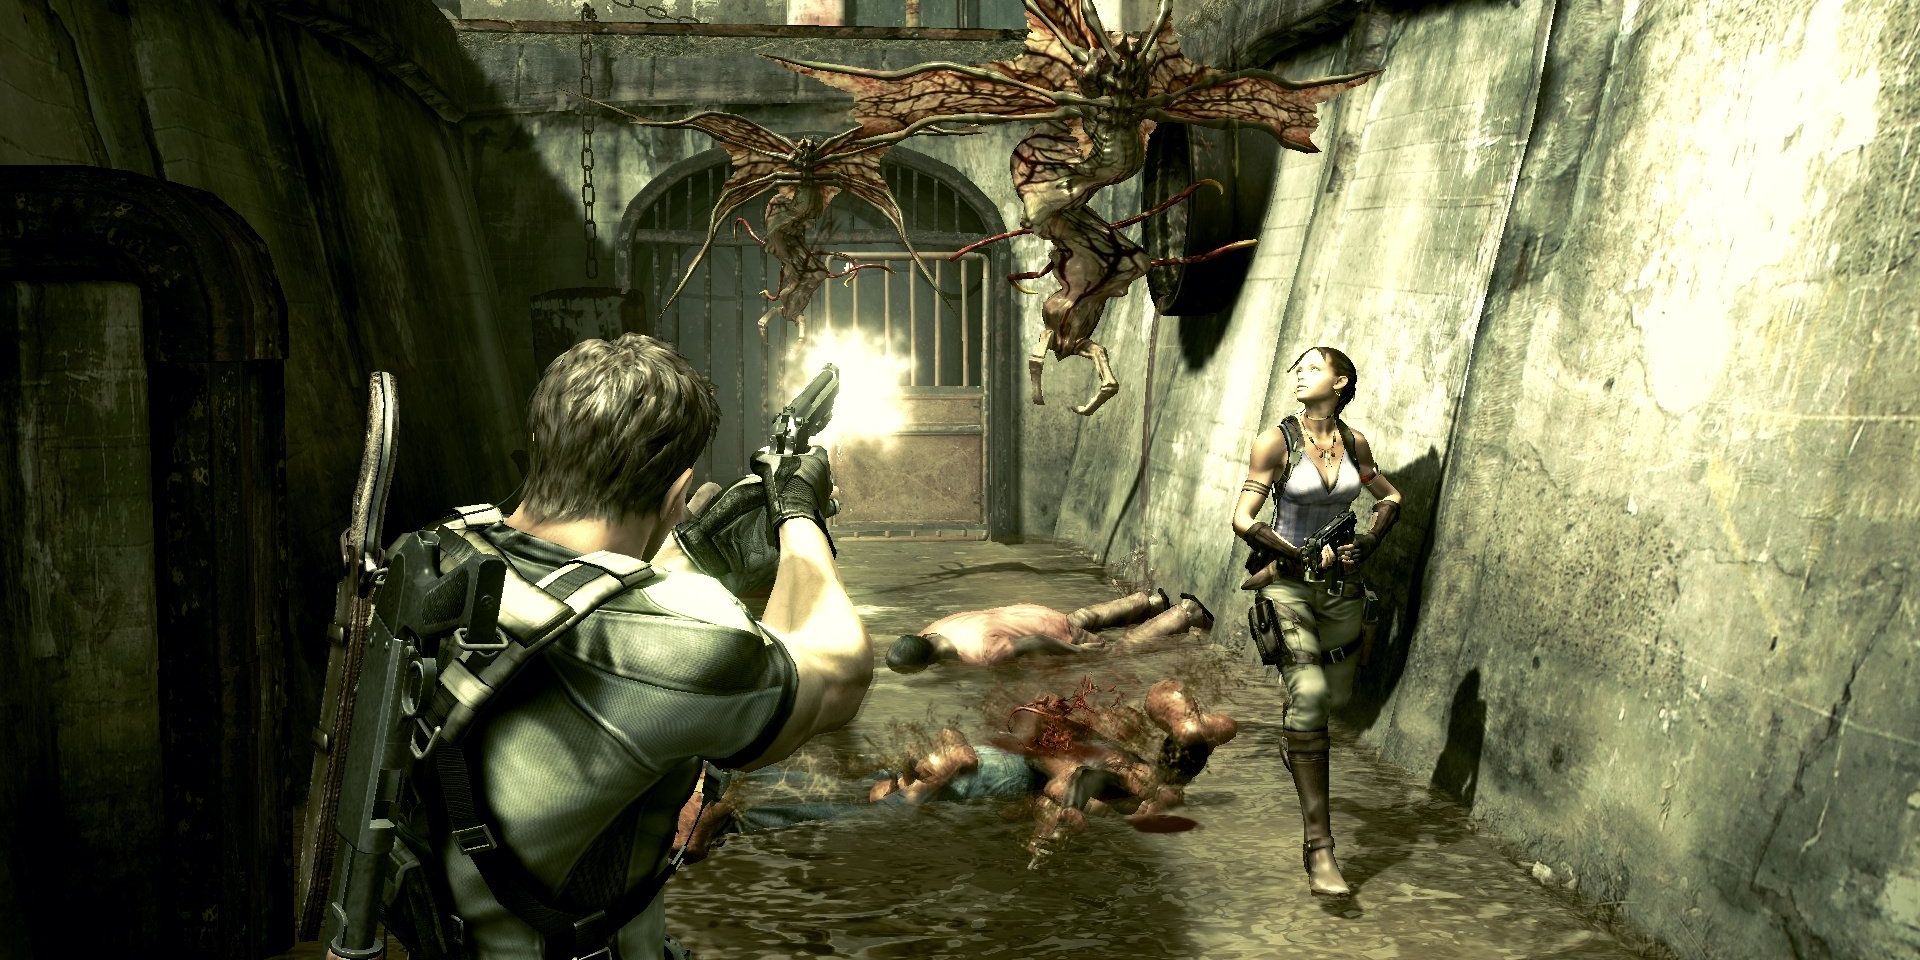 A screenshot showing Chris and Sheeva in Resident Evil 5